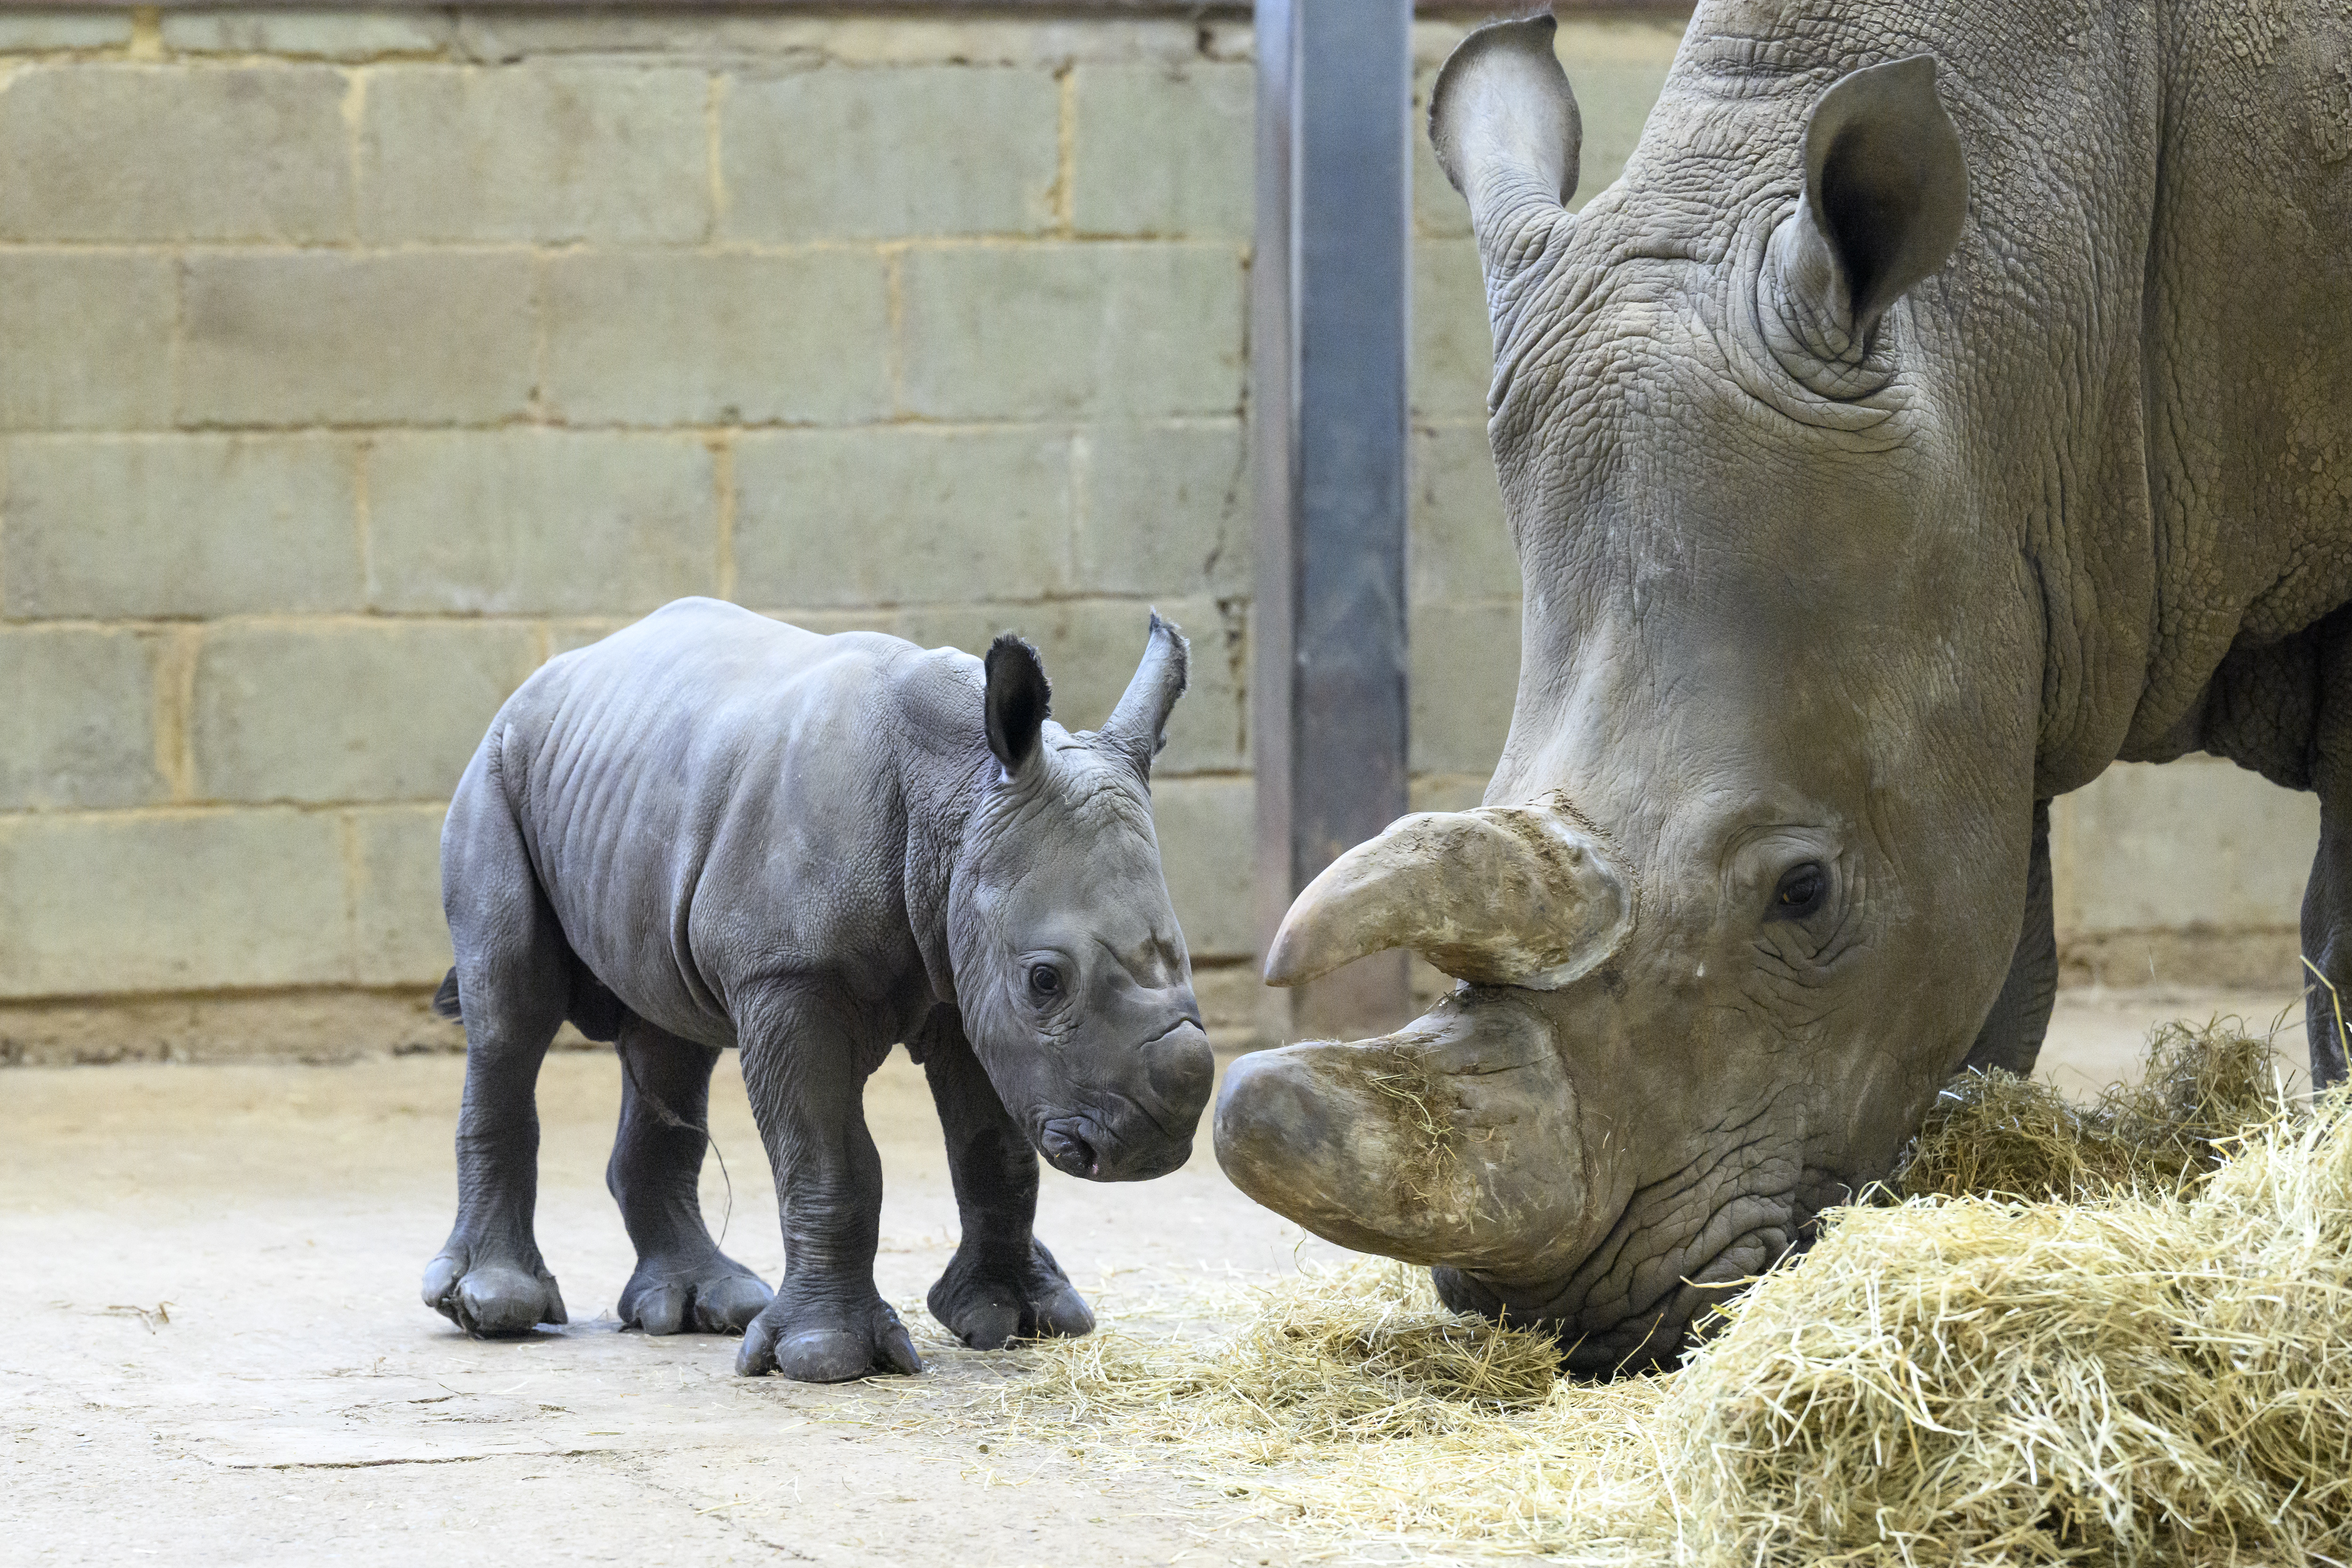 The baby rhino standing with his mother